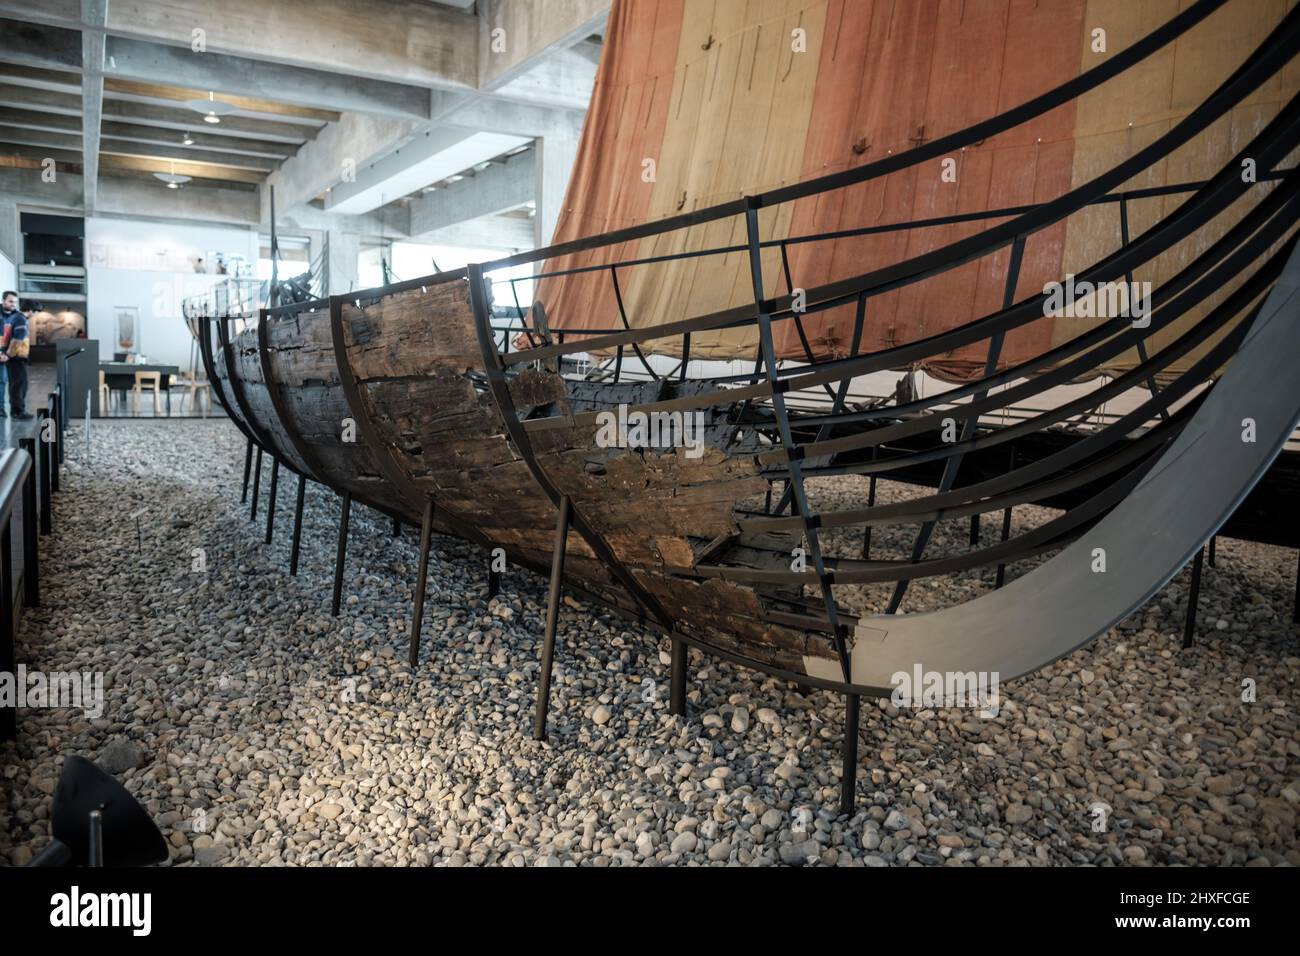 The remains of five original Viking ships scuttled in 1070 and excavated in 1962 make up the main attraction inside the National Viking Ship Museum. Stock Photo